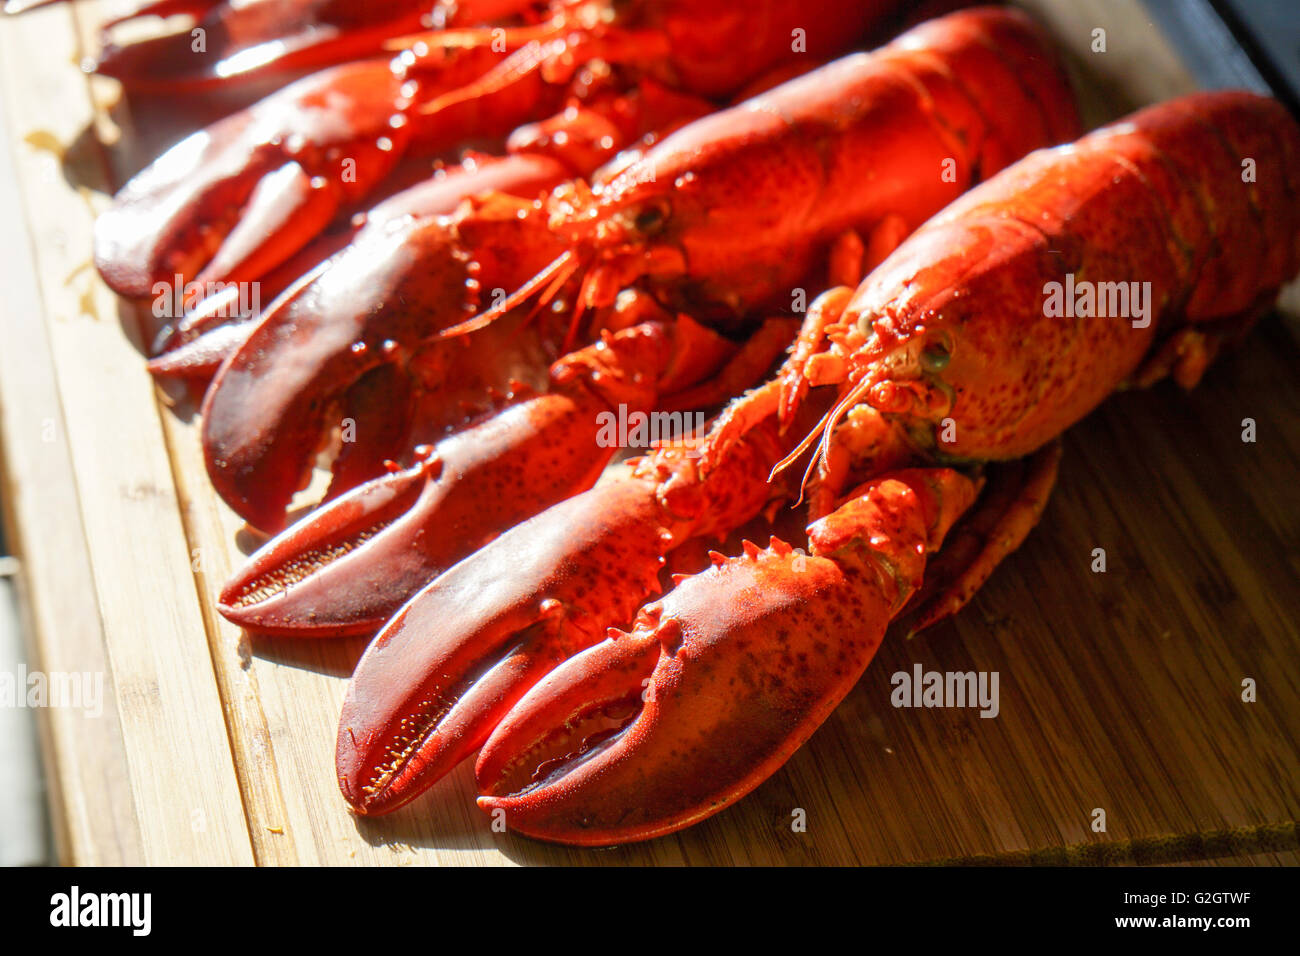 Cooked red Lobsters served on white plate ready for eating Stock Photo